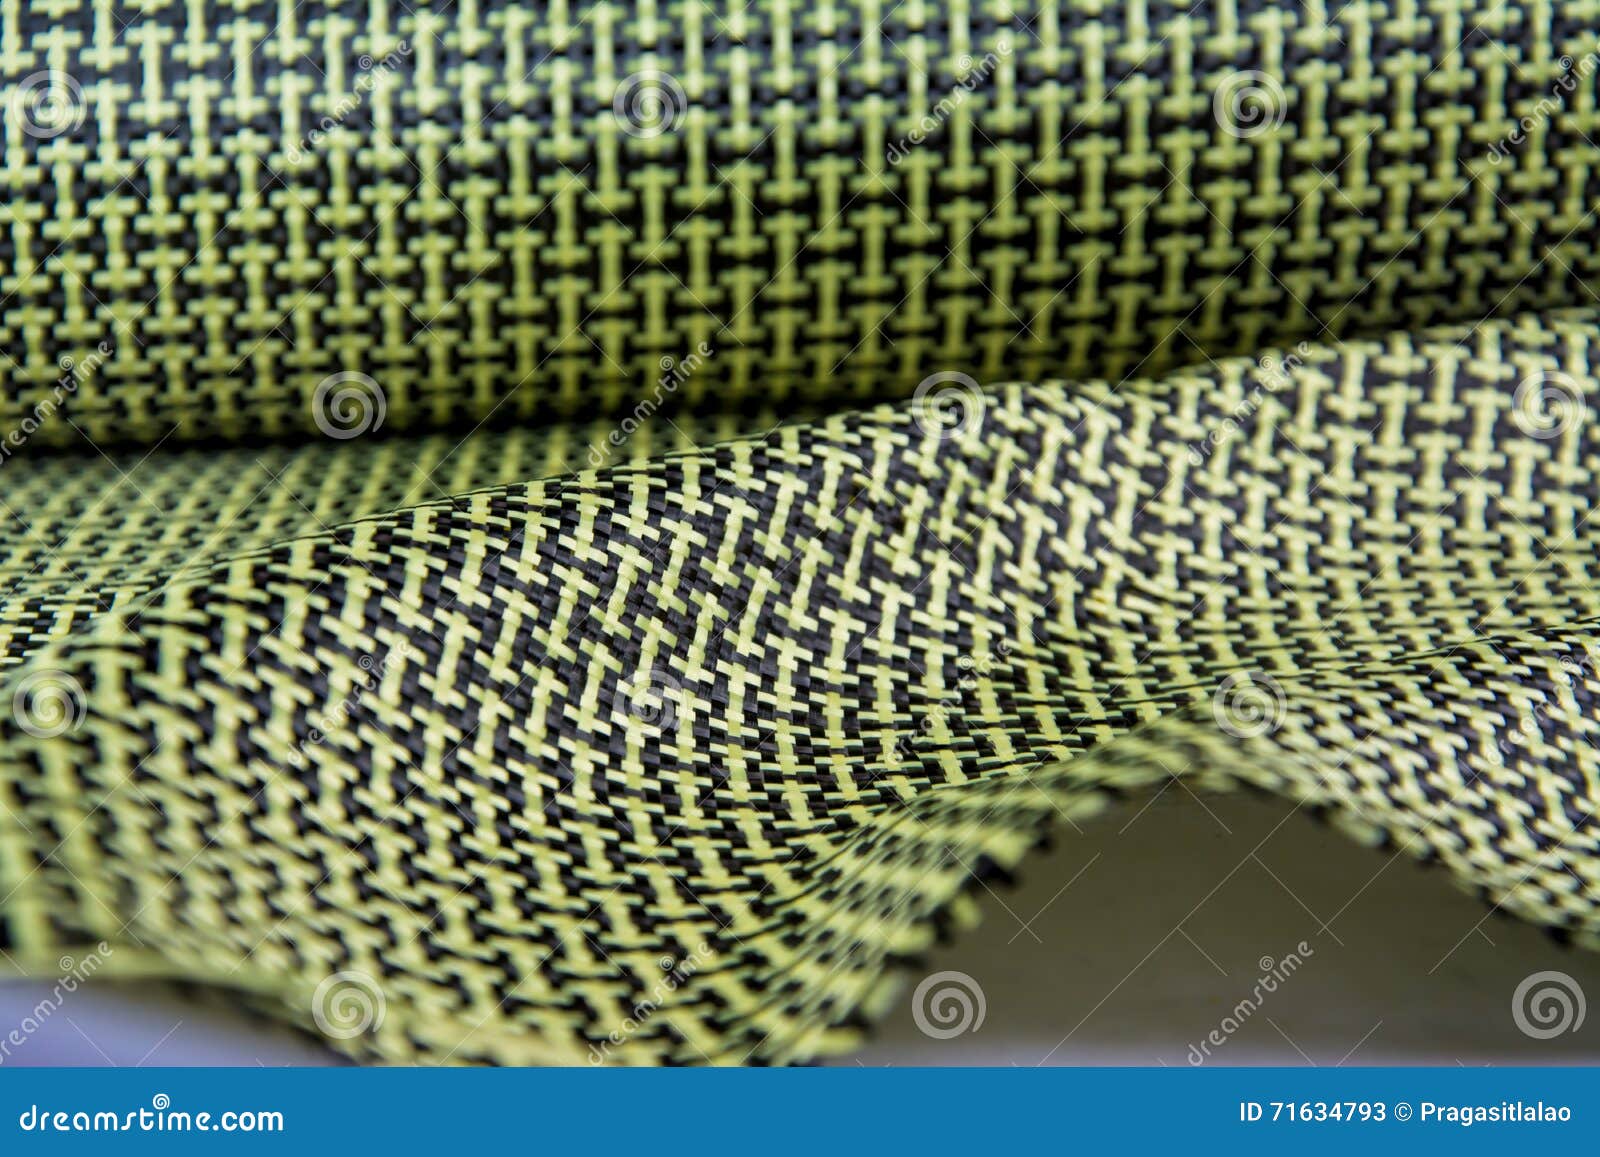 Carbon Fiber Twill Background Stock Image - Image of feel, industrial ...